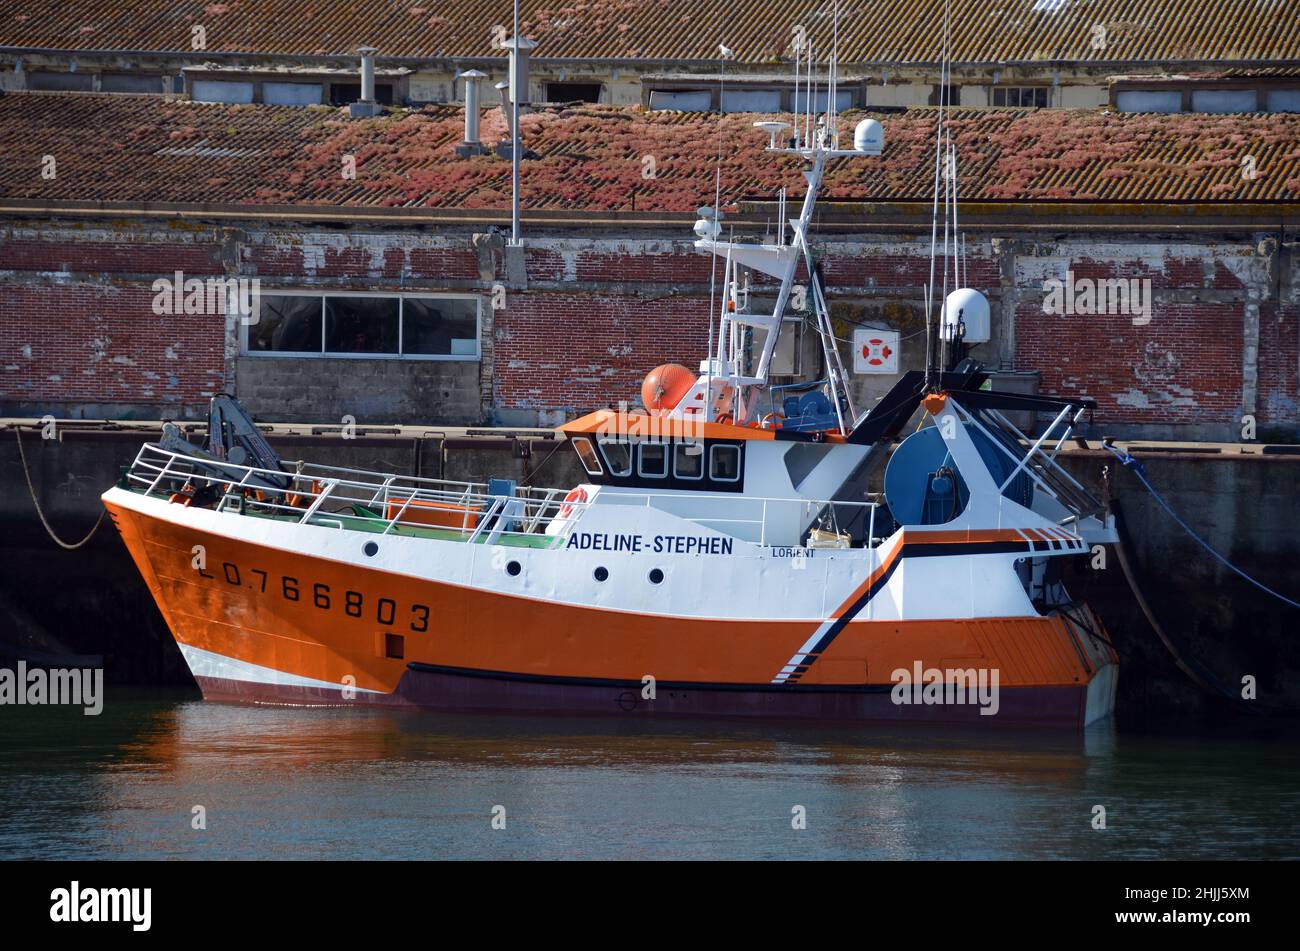 A trawler in the port of Lorient, Brittany. Lorient is the secong french fishing port after Boulogne sur mer in northern France. Stock Photo